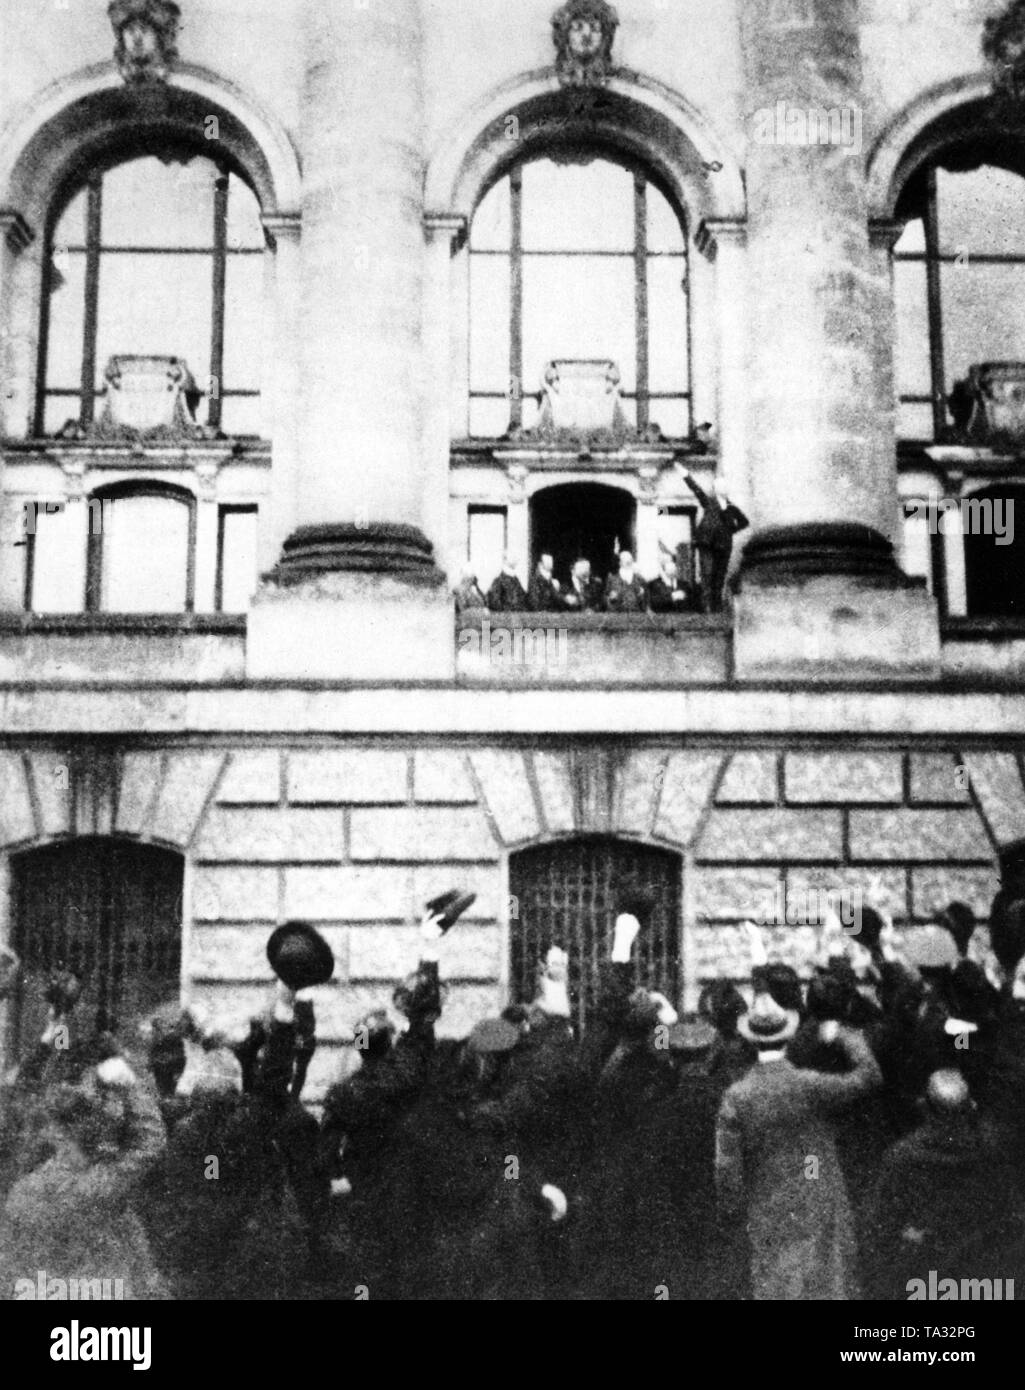 On 9 November 1918 Philipp Scheidemann (right on the balcony with an outstretched arm) proclaims the republic from a balcony of the Reichstag building. In the foreground people are waving. Stock Photo